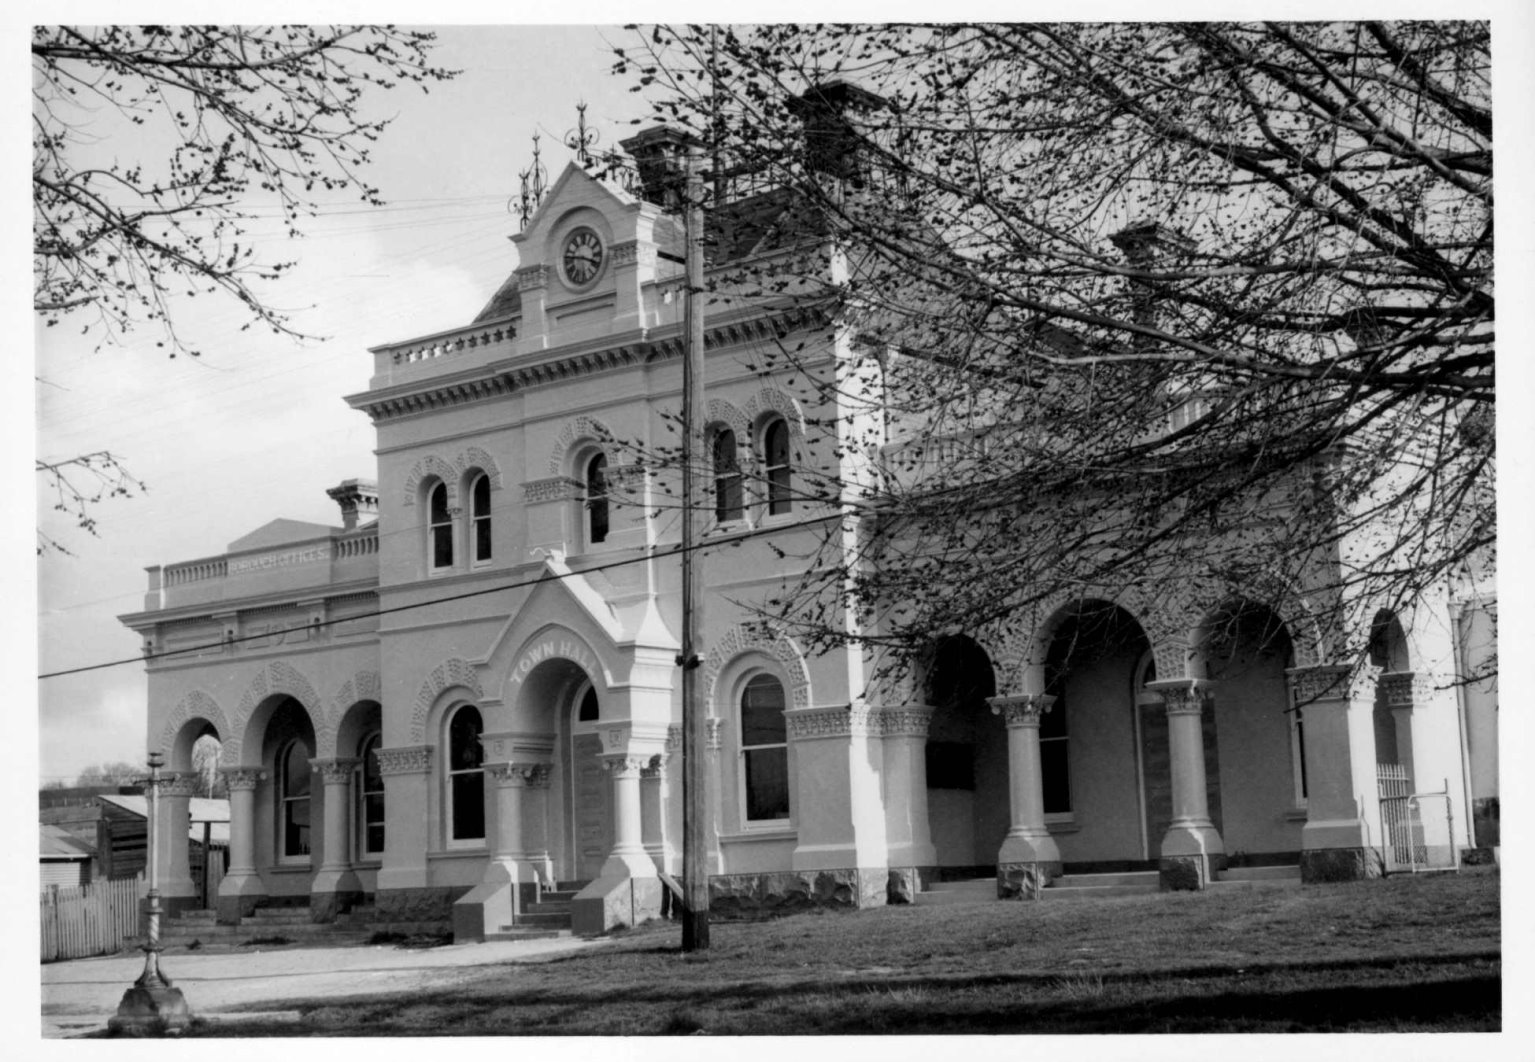 Clunes Town Hall